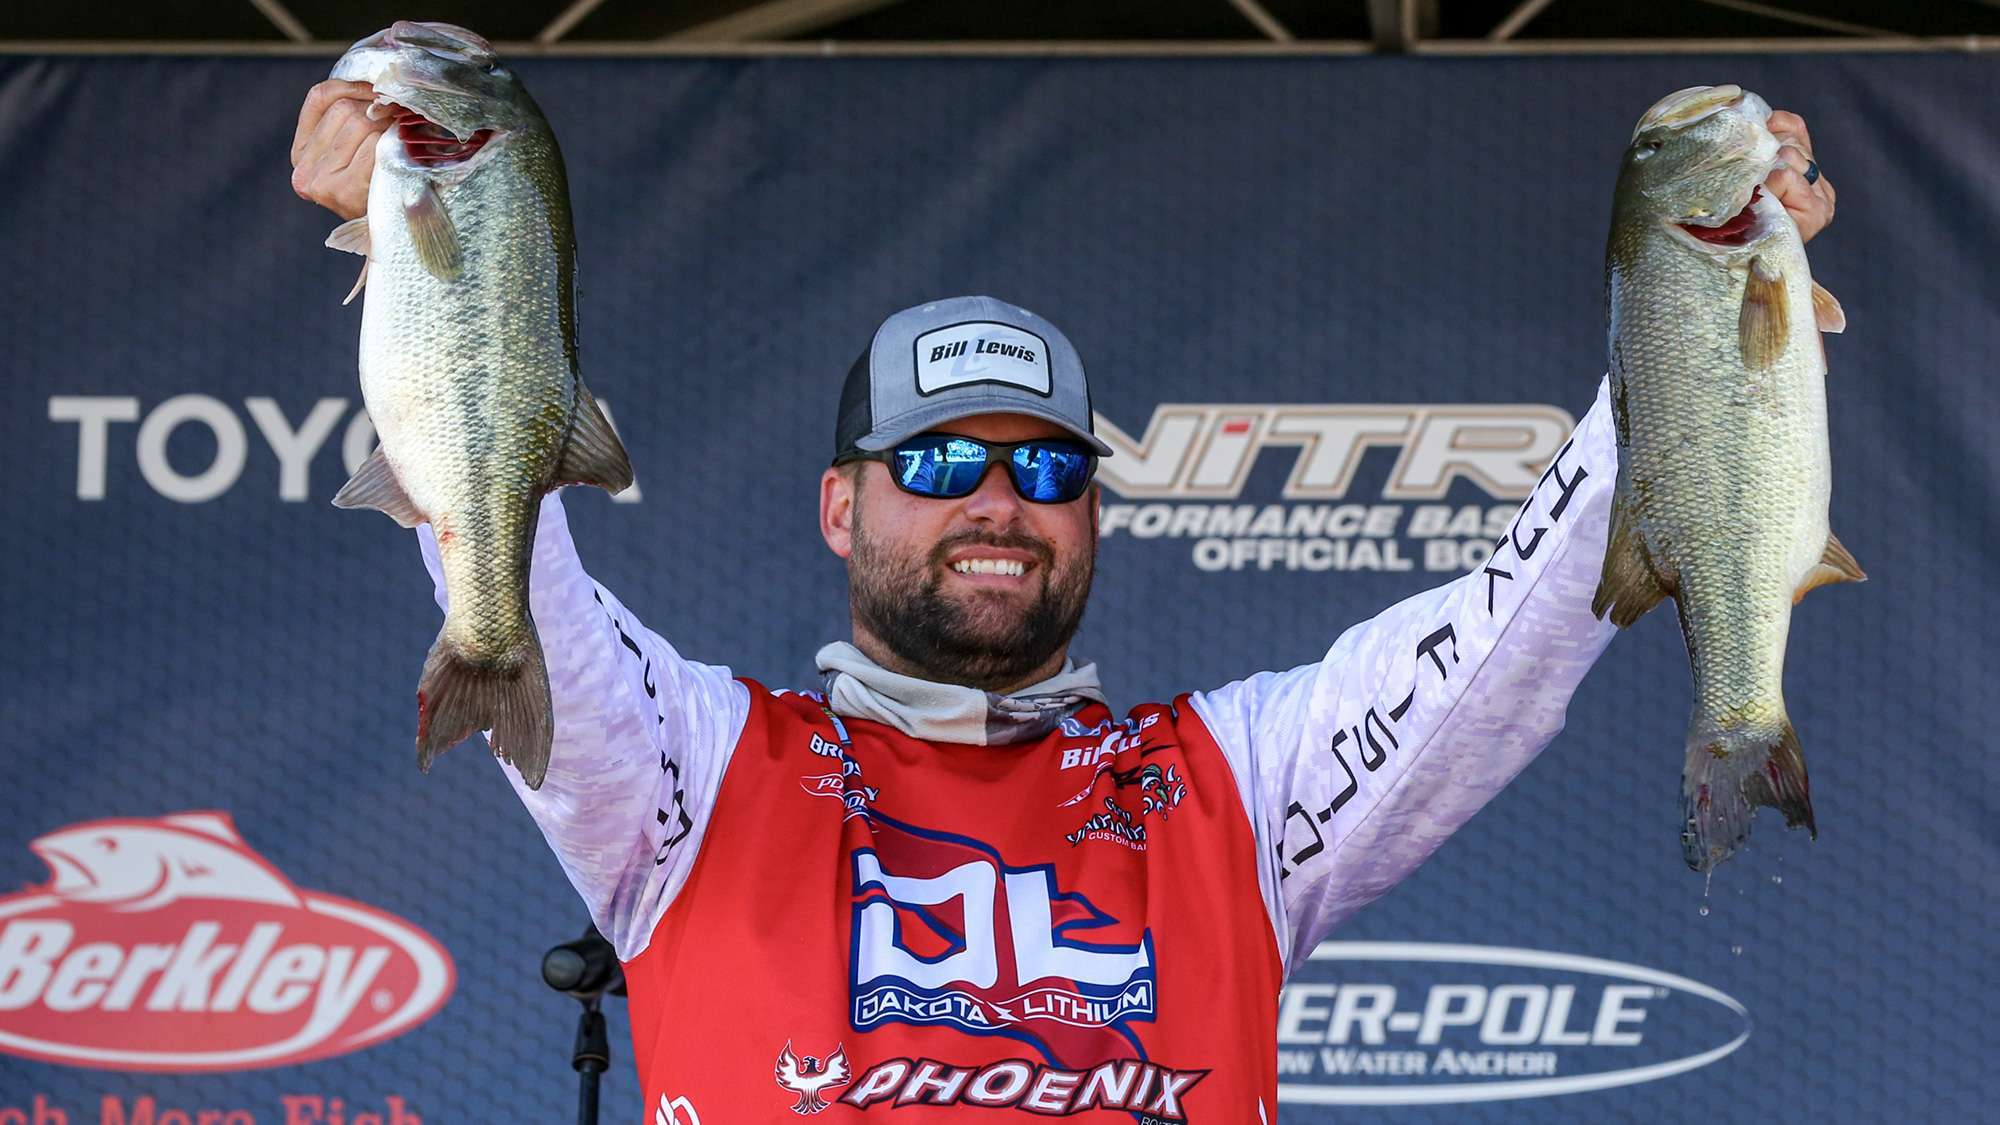 Brock Mosley continued his impressive run with the dayâs biggest bag of 16-15, which was bolstered by a 5-0 and another close to it. Mosley was chasing his fourth Top 10 of the season, which included runner-up finishes at the Sabine River and Pickwick Lake.